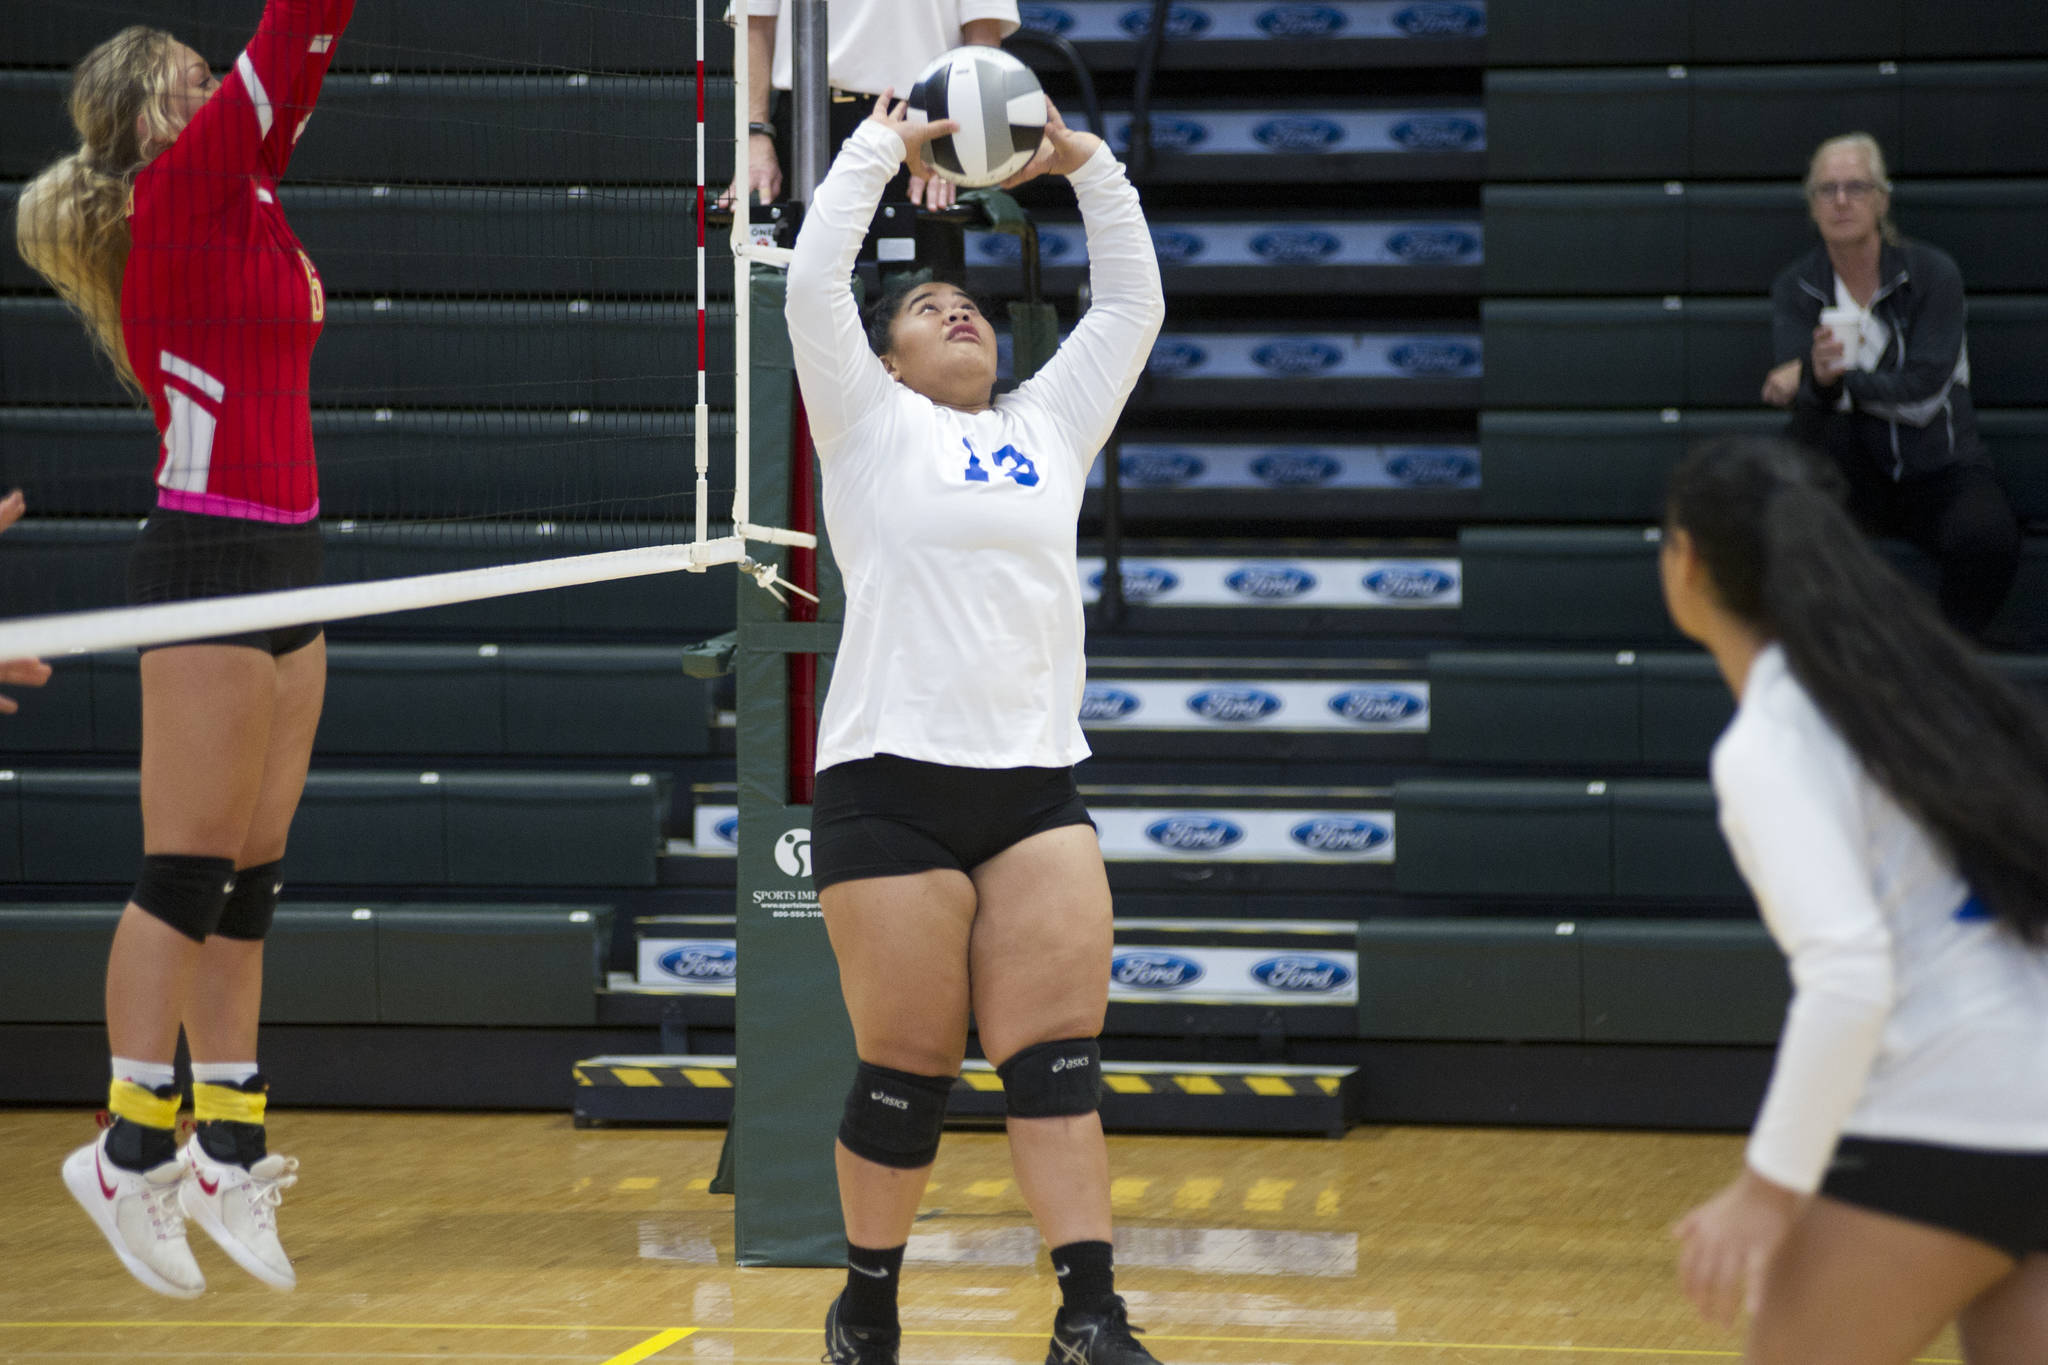 Thunder Mountain High School senior Marissa Tanuvasa-Tuaifale sets the ball against West Valley at the ASAA/First National Bank Alaska 3A/4A Volleyball State Championships on Friday at the Alaska Airlines Center in Anchorage. The Falcons won 3-1 (26-24, 19-25, 25-18, 25-23). (Nolin Ainsworth | Juneau Empire)